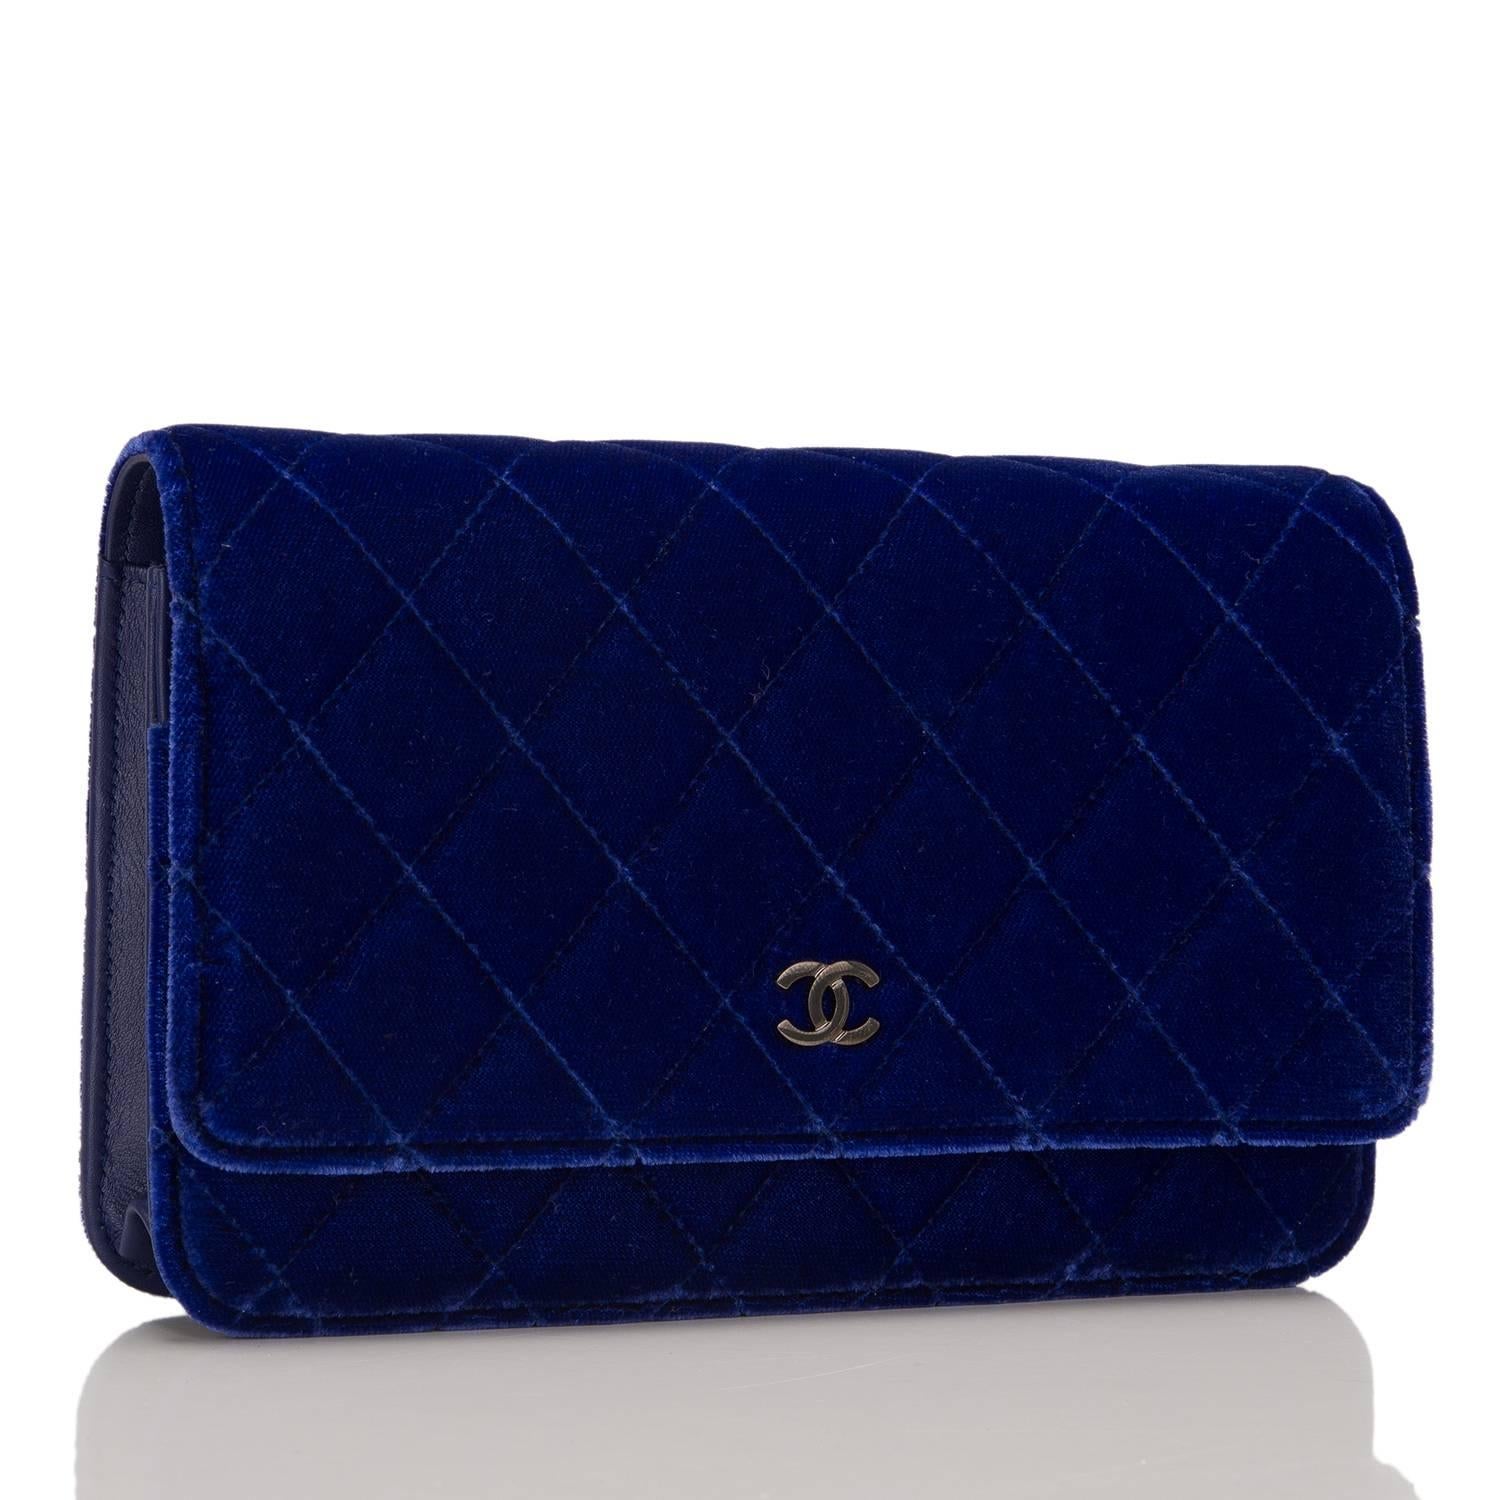 Deep and vibrant, this electric blue velvet Wallet On Chain brings out the beauty of one of Chanel's classic WOC styles. It features signature Chanel quilting, front flap with CC charm and hidden snap closure, expandable sides and bottom, half moon